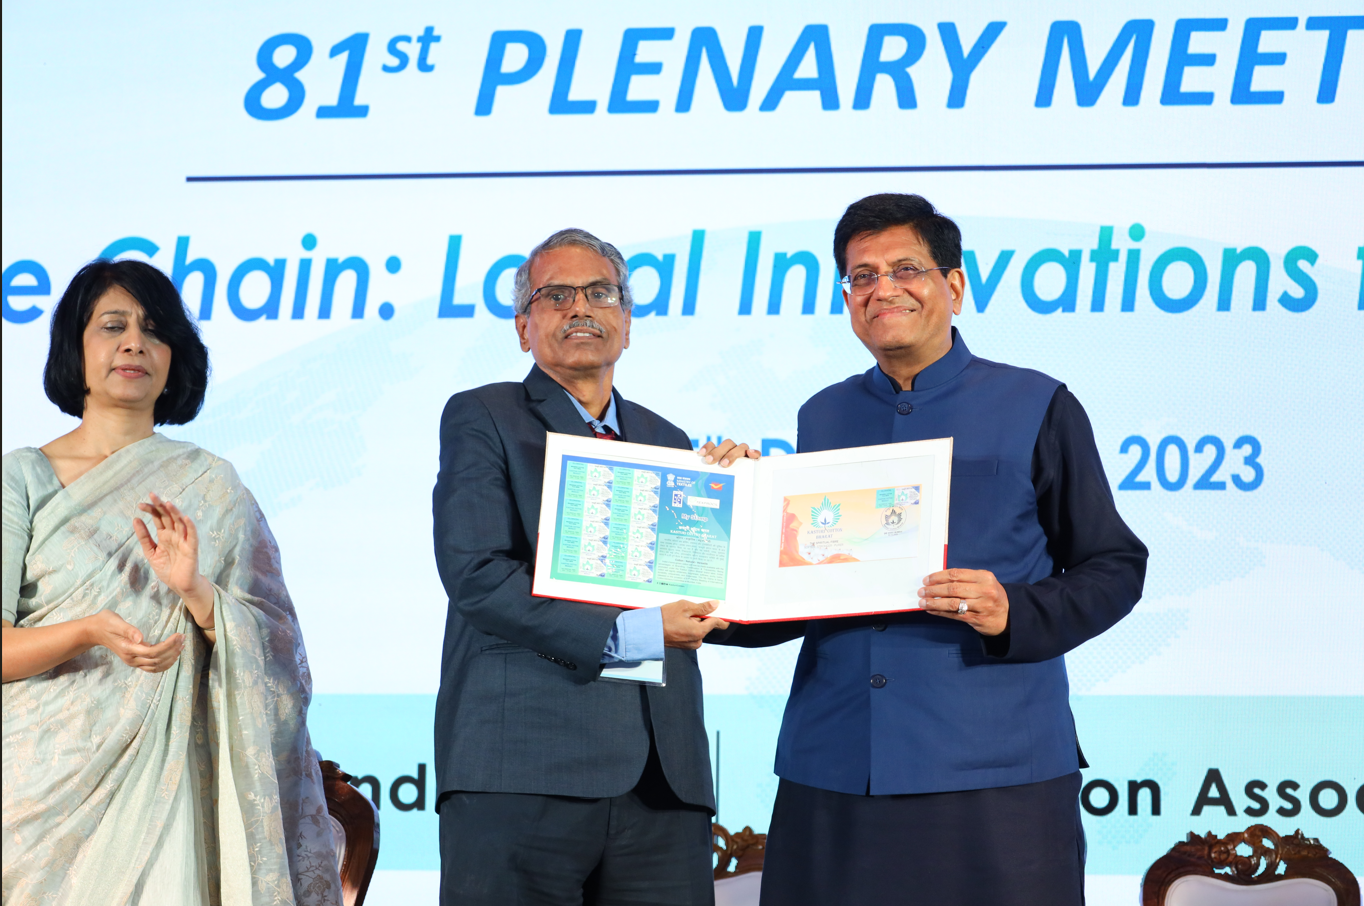 Hon’ble Union Minister, Shri Piyush Goyal ji, releasing the commemorative stamp on Kasturi Cotton Bharat at the 81st Plenary Meeting of the (ICAC) held on 2nd Dec 2023 at the Jio Convention Centre, Mumbai